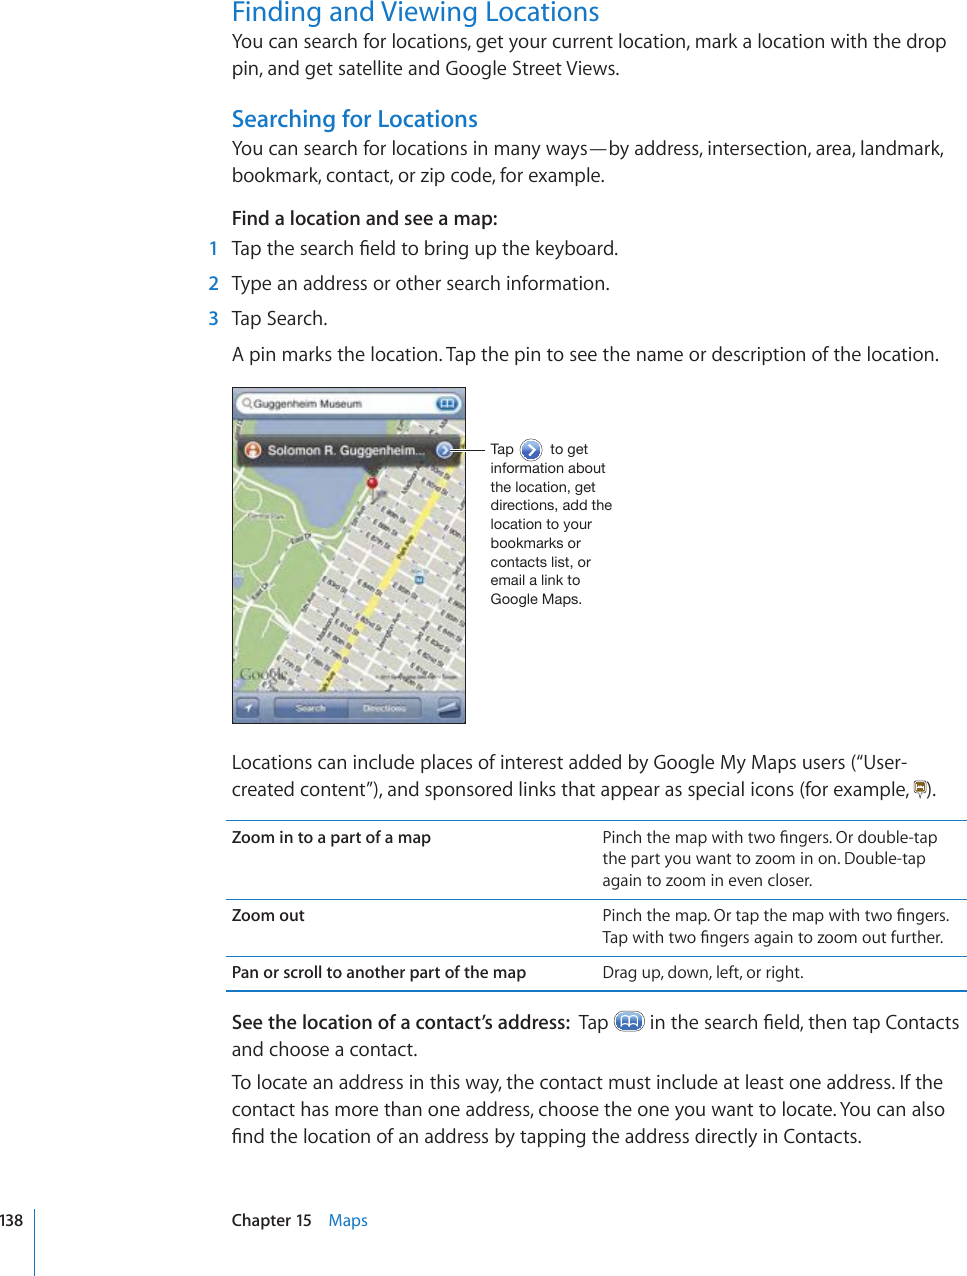 Finding and Viewing LocationsYou can search for locations, get your current location, mark a location with the drop pin, and get satellite and Google Street Views.Searching for LocationsYou can search for locations in many ways—by address, intersection, area, landmark, bookmark, contact, or zip code, for example. Find a location and see a map:  1 6CRVJGUGCTEJ°GNFVQDTKPIWRVJGMG[DQCTF  2  Type an address or other search information.  3  Tap Search.A pin marks the location. Tap the pin to see the name or description of the location.;HW[VNL[PUMVYTH[PVUHIV\[[OLSVJH[PVUNL[KPYLJ[PVUZHKK[OLSVJH[PVU[V`V\YIVVRTHYRZVYJVU[HJ[ZSPZ[VYLTHPSHSPUR[V.VVNSL4HWZLocations can include places of interest added by Google My Maps users (“User-created content”), and sponsored links that appear as special icons (for example,  ).Zoom in to a part of a map 2KPEJVJGOCRYKVJVYQ°PIGTU1TFQWDNGVCRthe part you want to zoom in on. Double-tap again to zoom in even closer.Zoom out 2KPEJVJGOCR1TVCRVJGOCRYKVJVYQ°PIGTU6CRYKVJVYQ°PIGTUCICKPVQ\QQOQWVHWTVJGTPan or scroll to another part of the map Drag up, down, left, or right.See the location of a contact’s address:  Tap  KPVJGUGCTEJ°GNFVJGPVCR%QPVCEVUand choose a contact.To locate an address in this way, the contact must include at least one address. If the contact has more than one address, choose the one you want to locate. You can also °PFVJGNQECVKQPQHCPCFFTGUUD[VCRRKPIVJGCFFTGUUFKTGEVN[KP%QPVCEVU138 Chapter 15    Maps